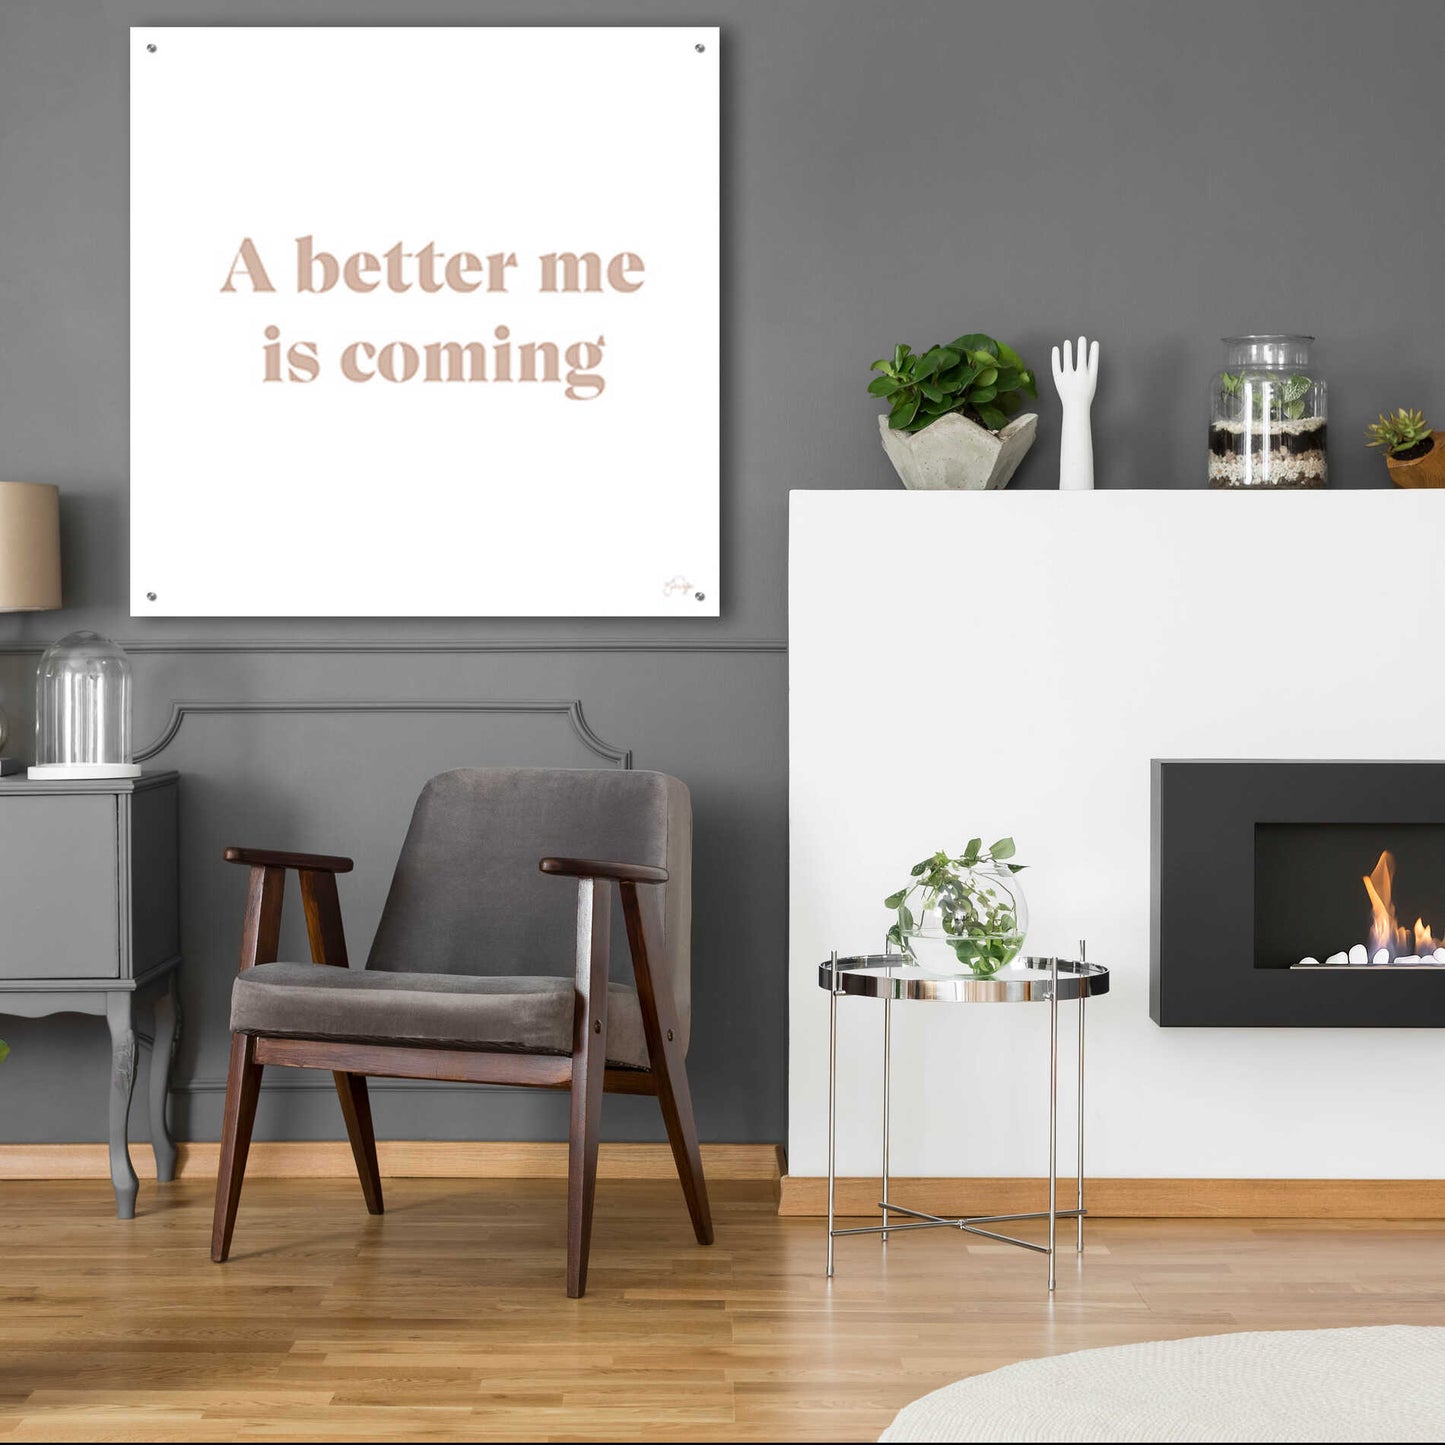 Epic Art 'A Better Me is Coming' by Yass Naffas Designs, Acrylic Glass Wall Art,36x36